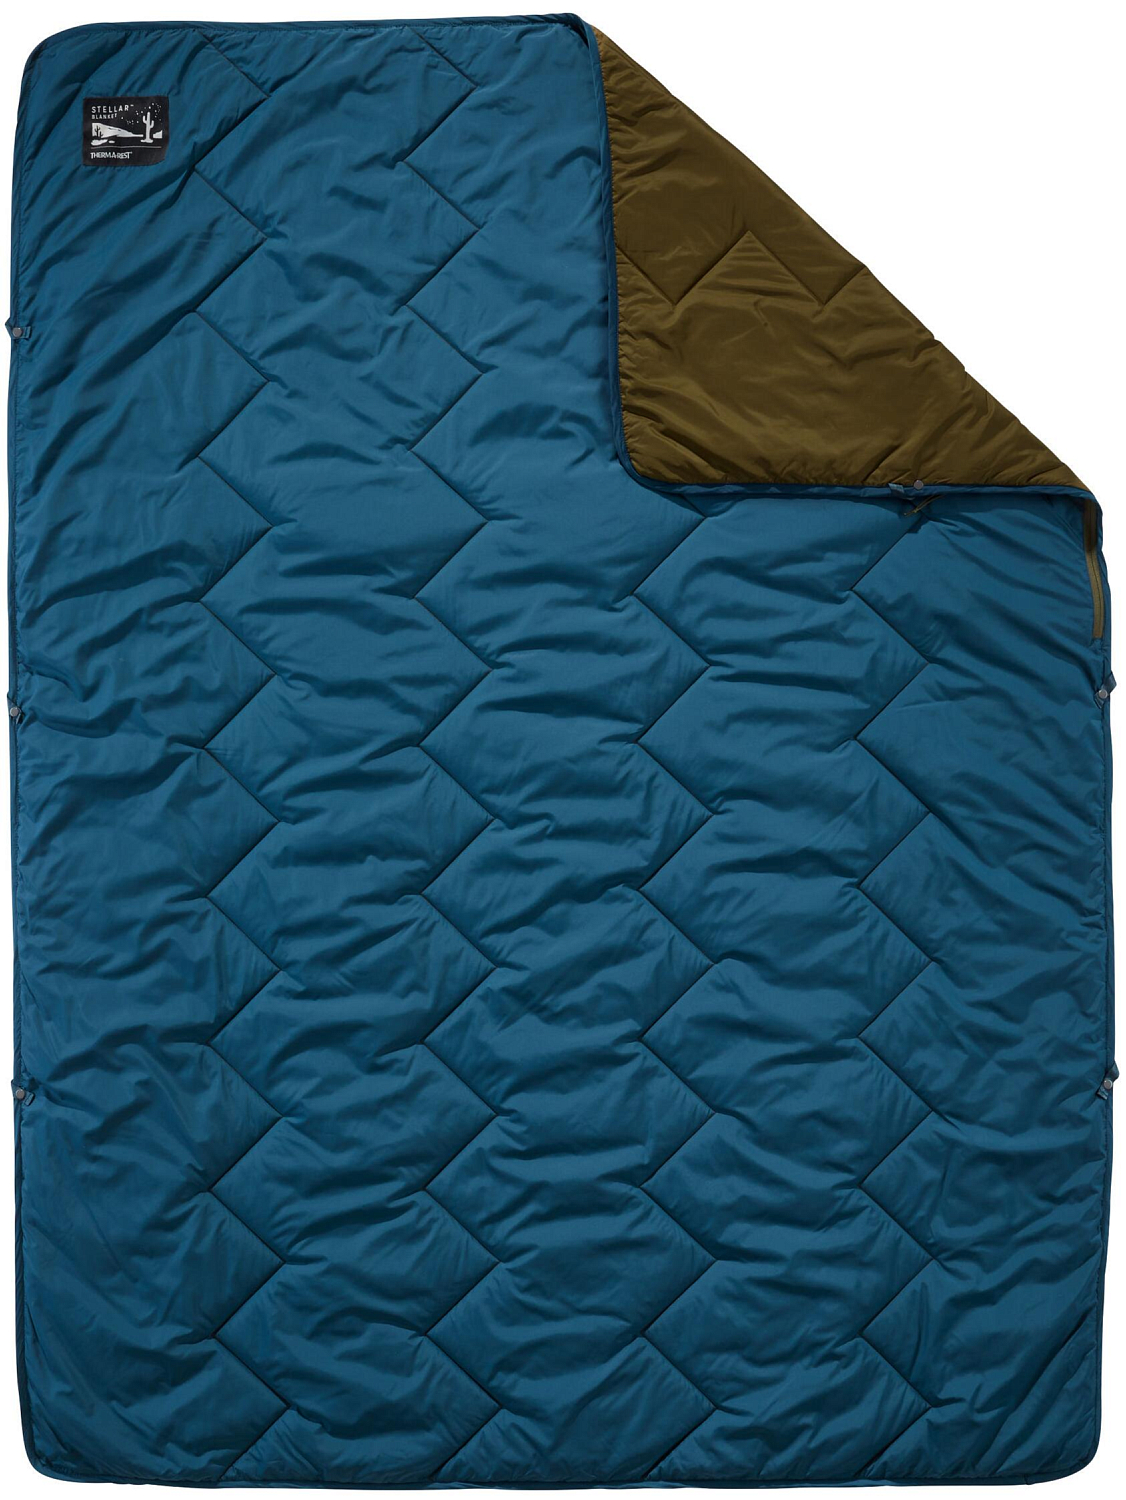 Одеяло THERM-A-REST Stellar Blanket Deep Pacific